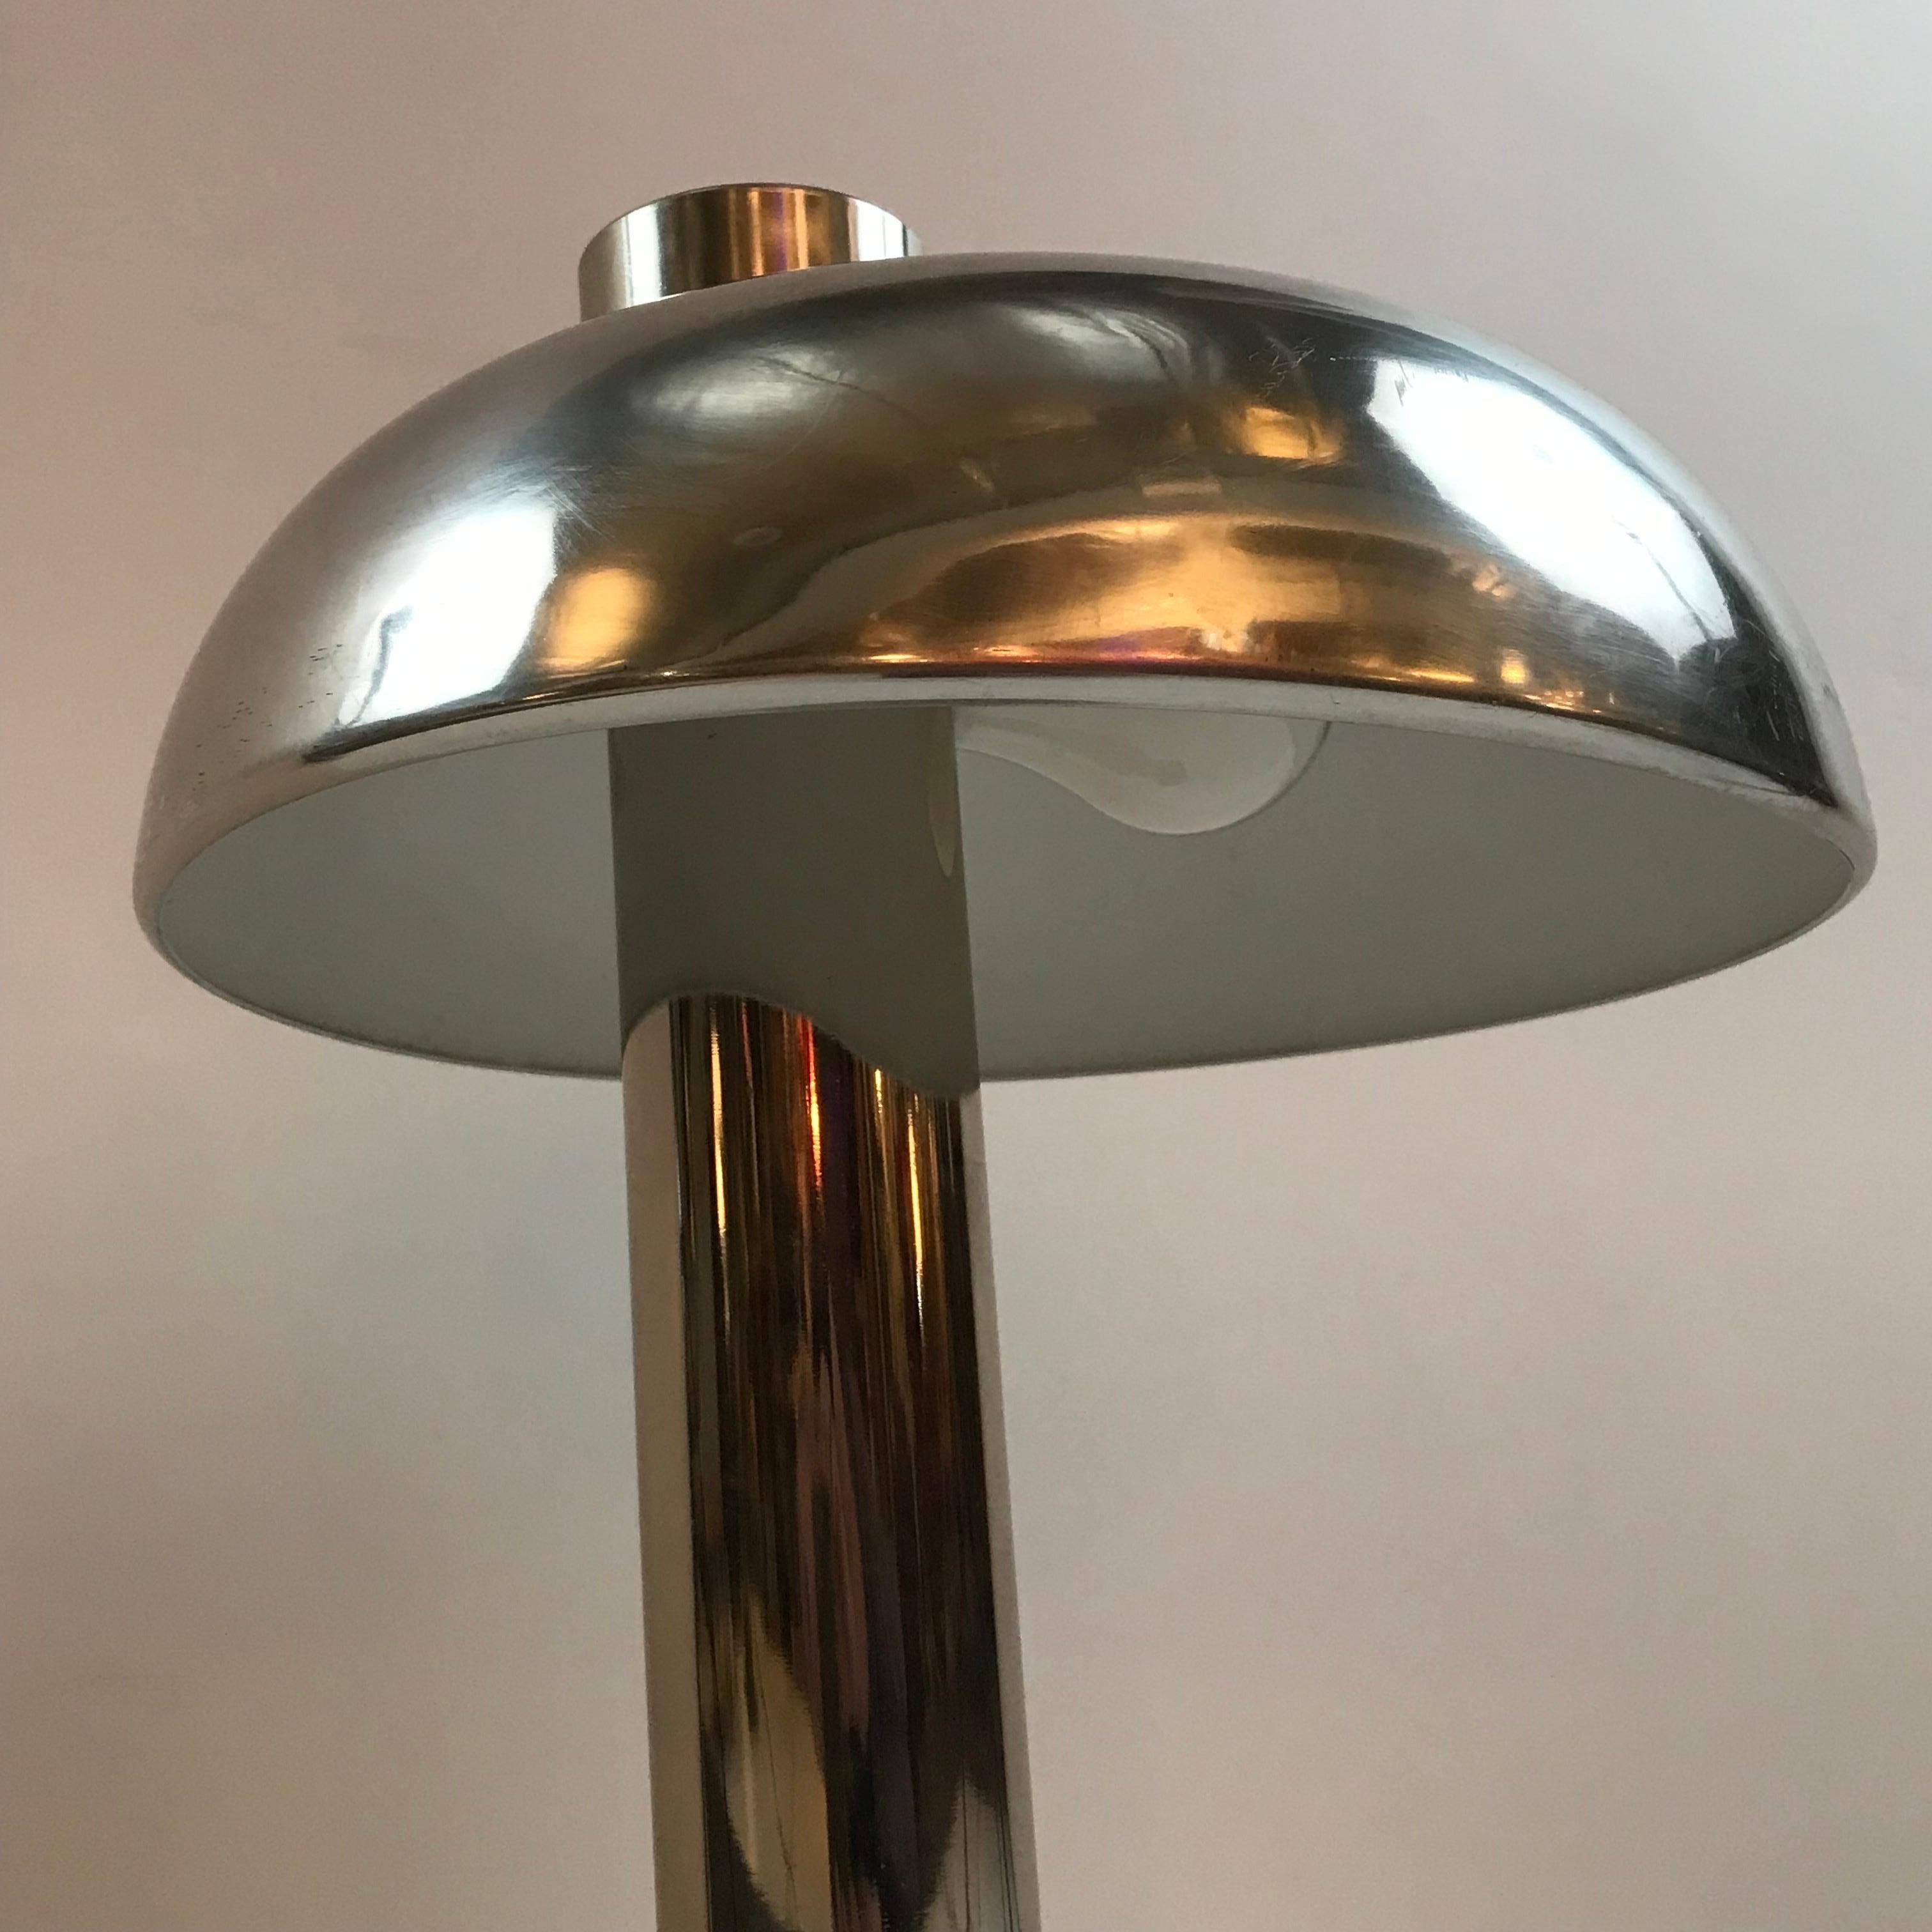 Machine-Made Rare 1970's Laurel Chromed Steel Desk Lamp with Sculptural Cantilevered Shade